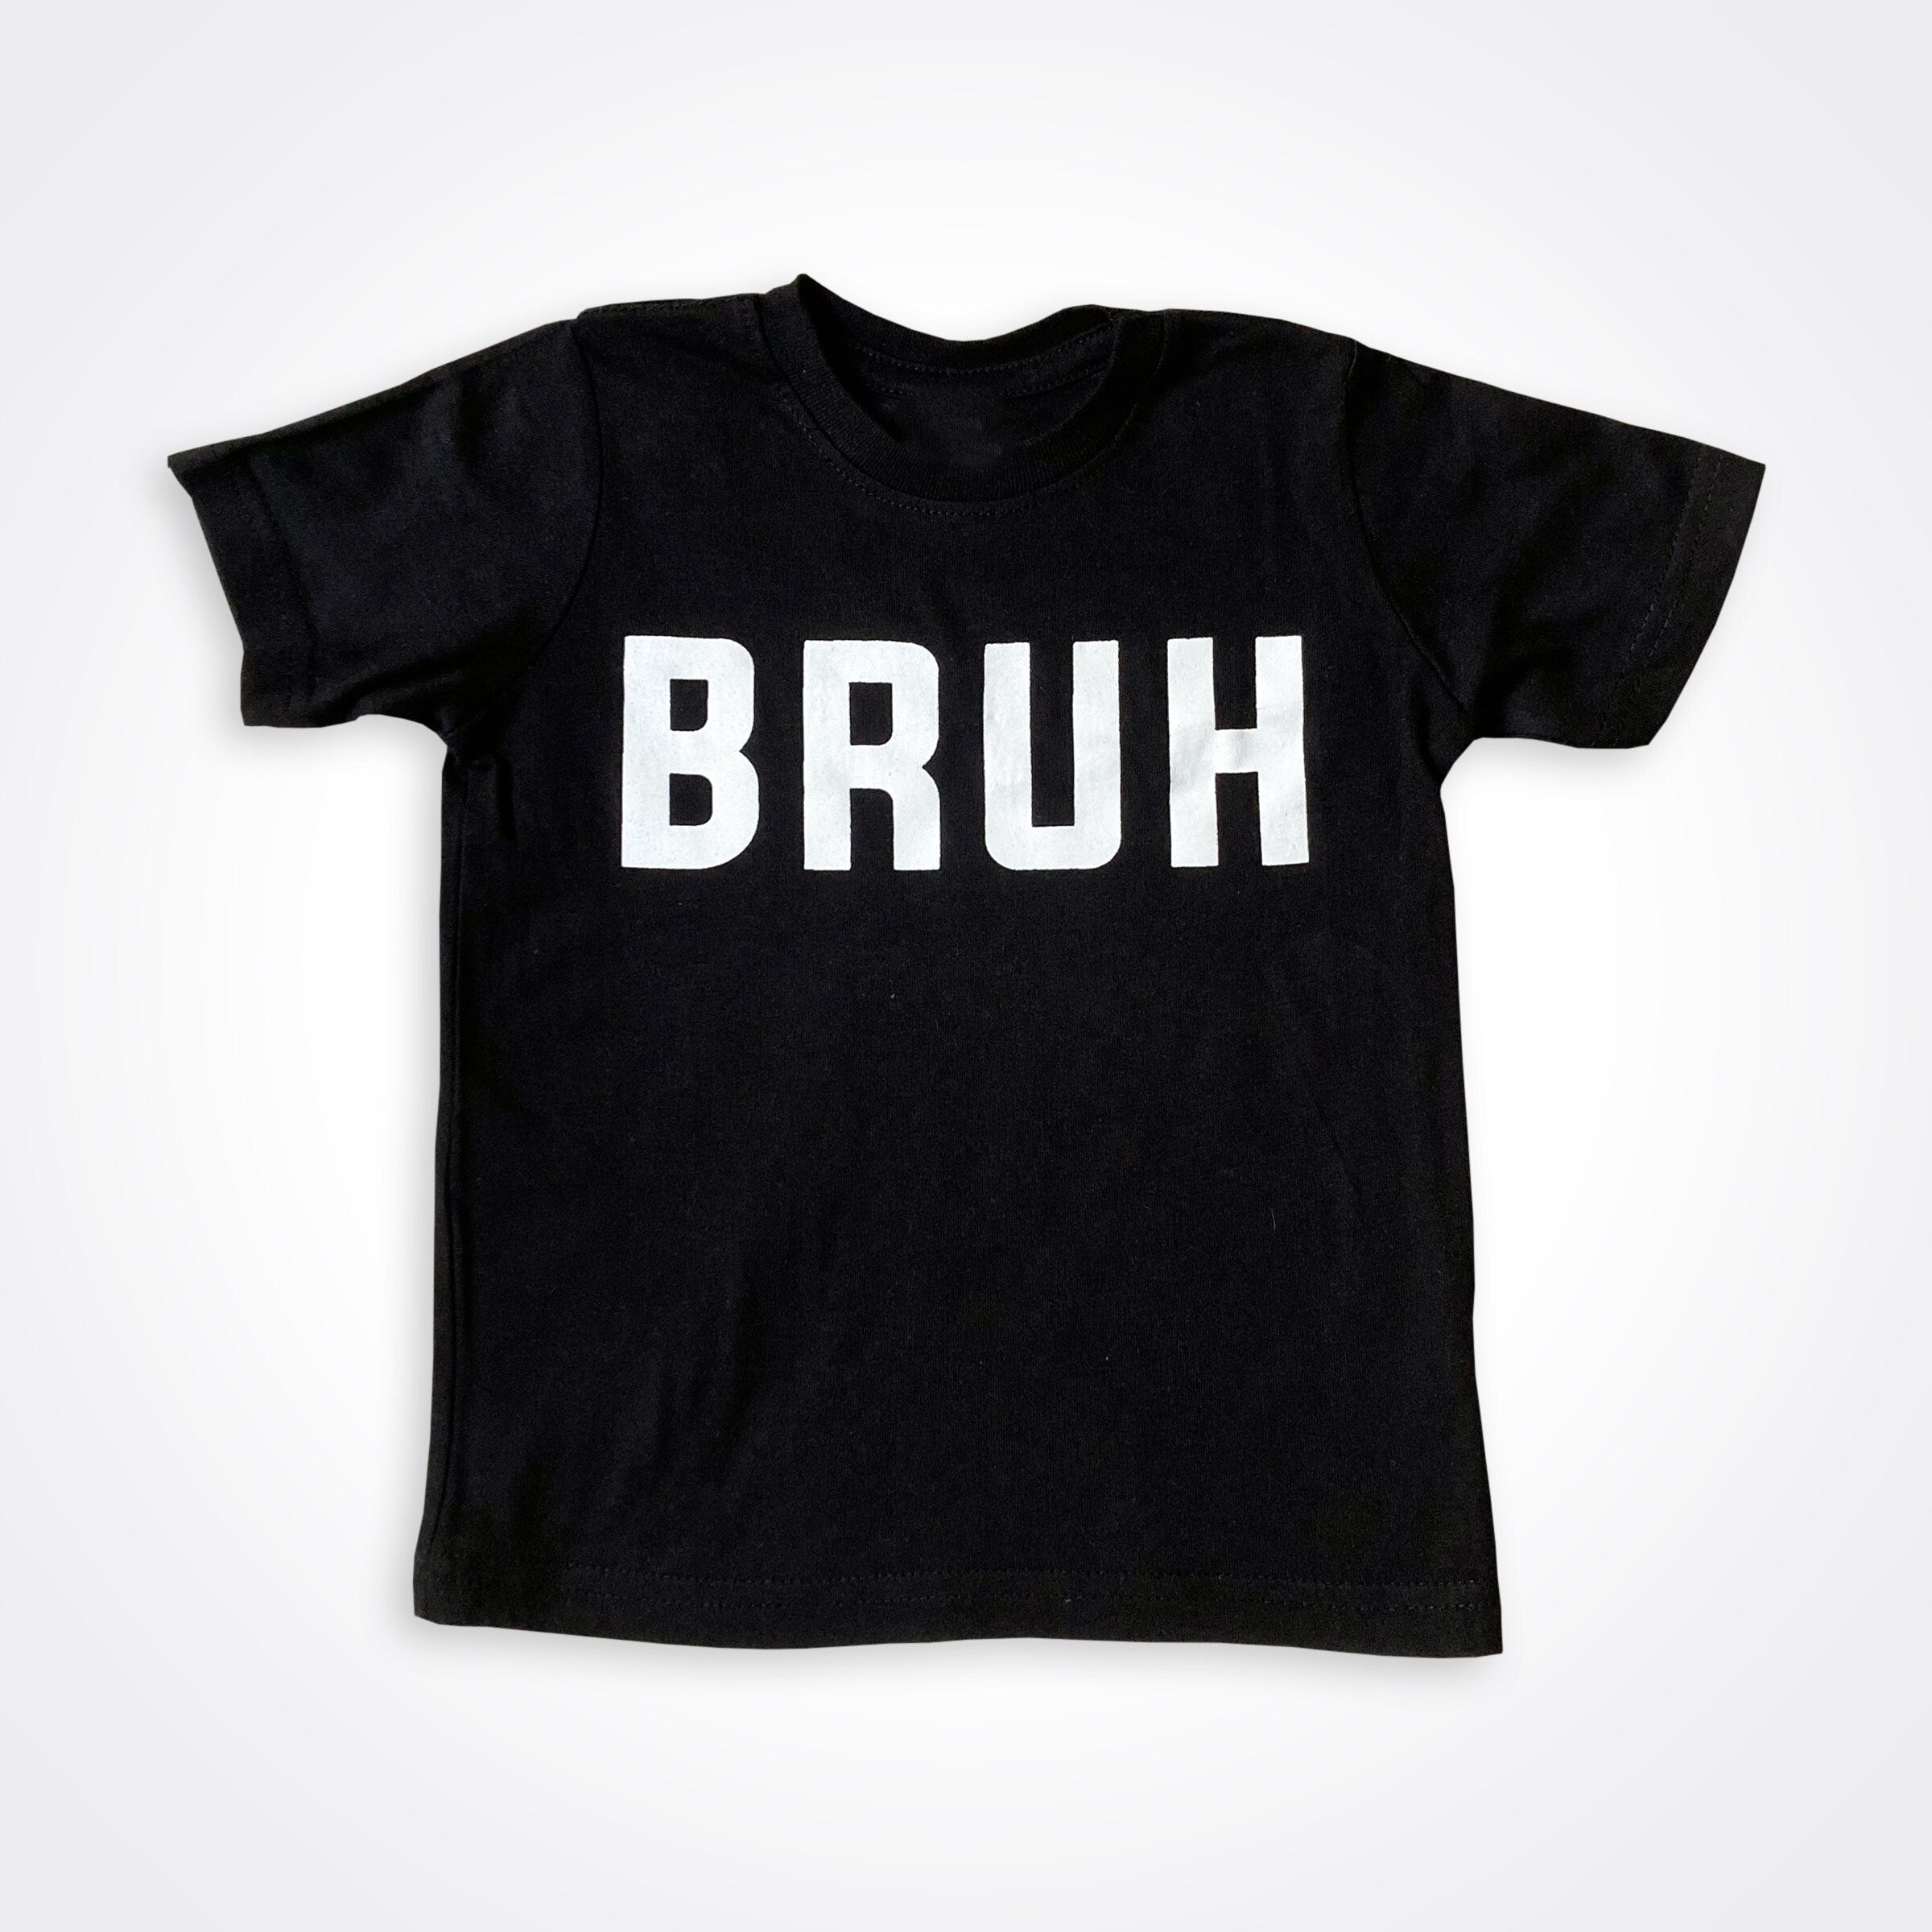 Bruh Black with White Shirt, 6M-5/6T